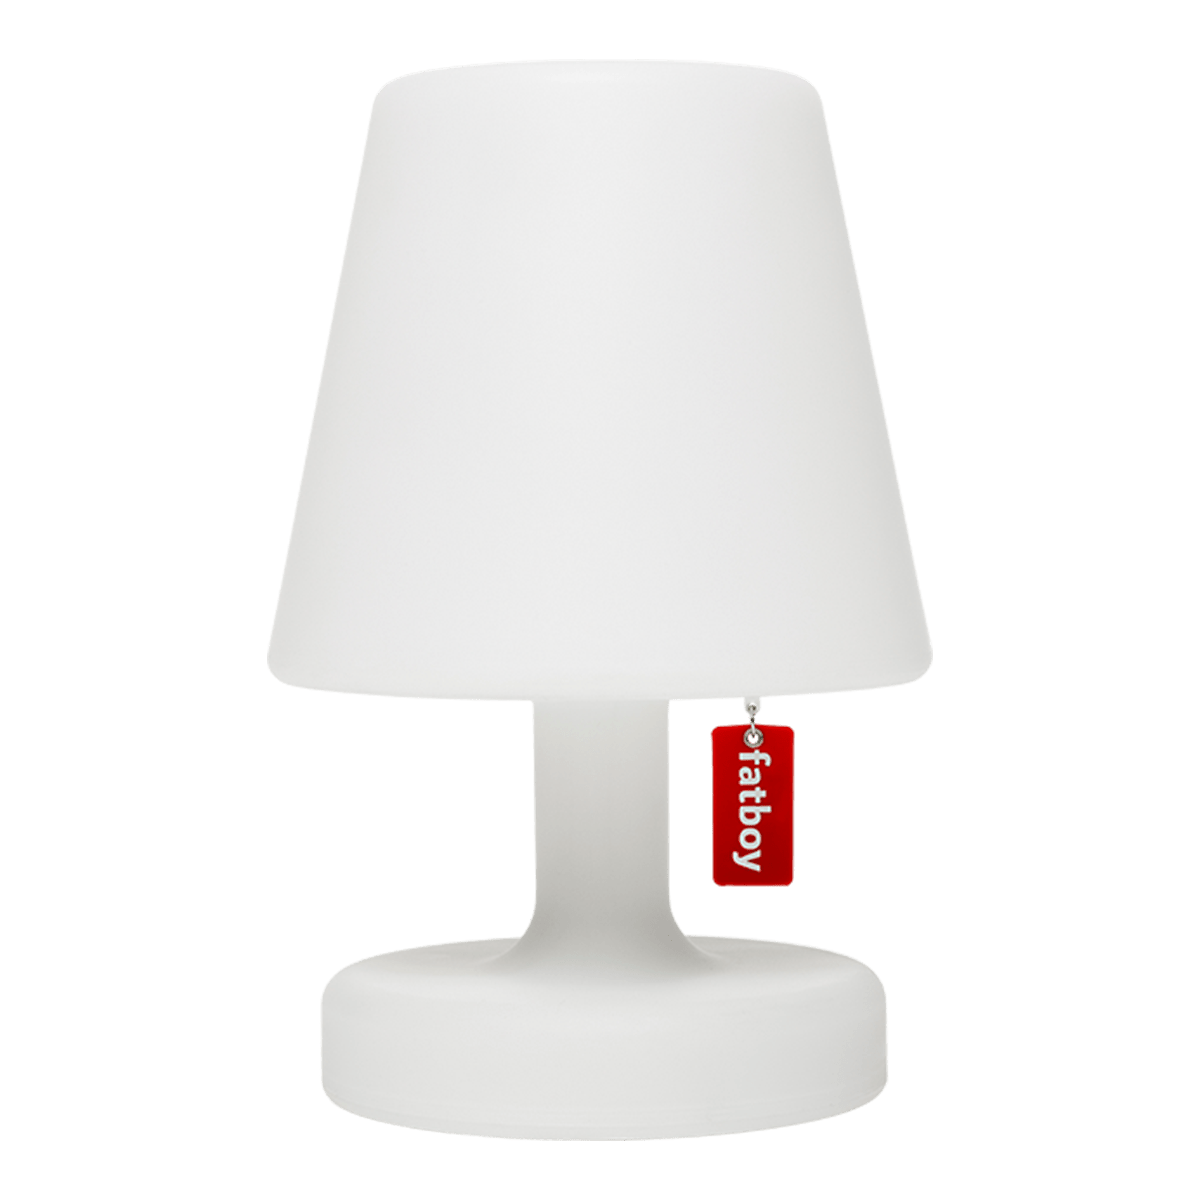 Edison the Petit: white table lamp for indoor & outdoor use